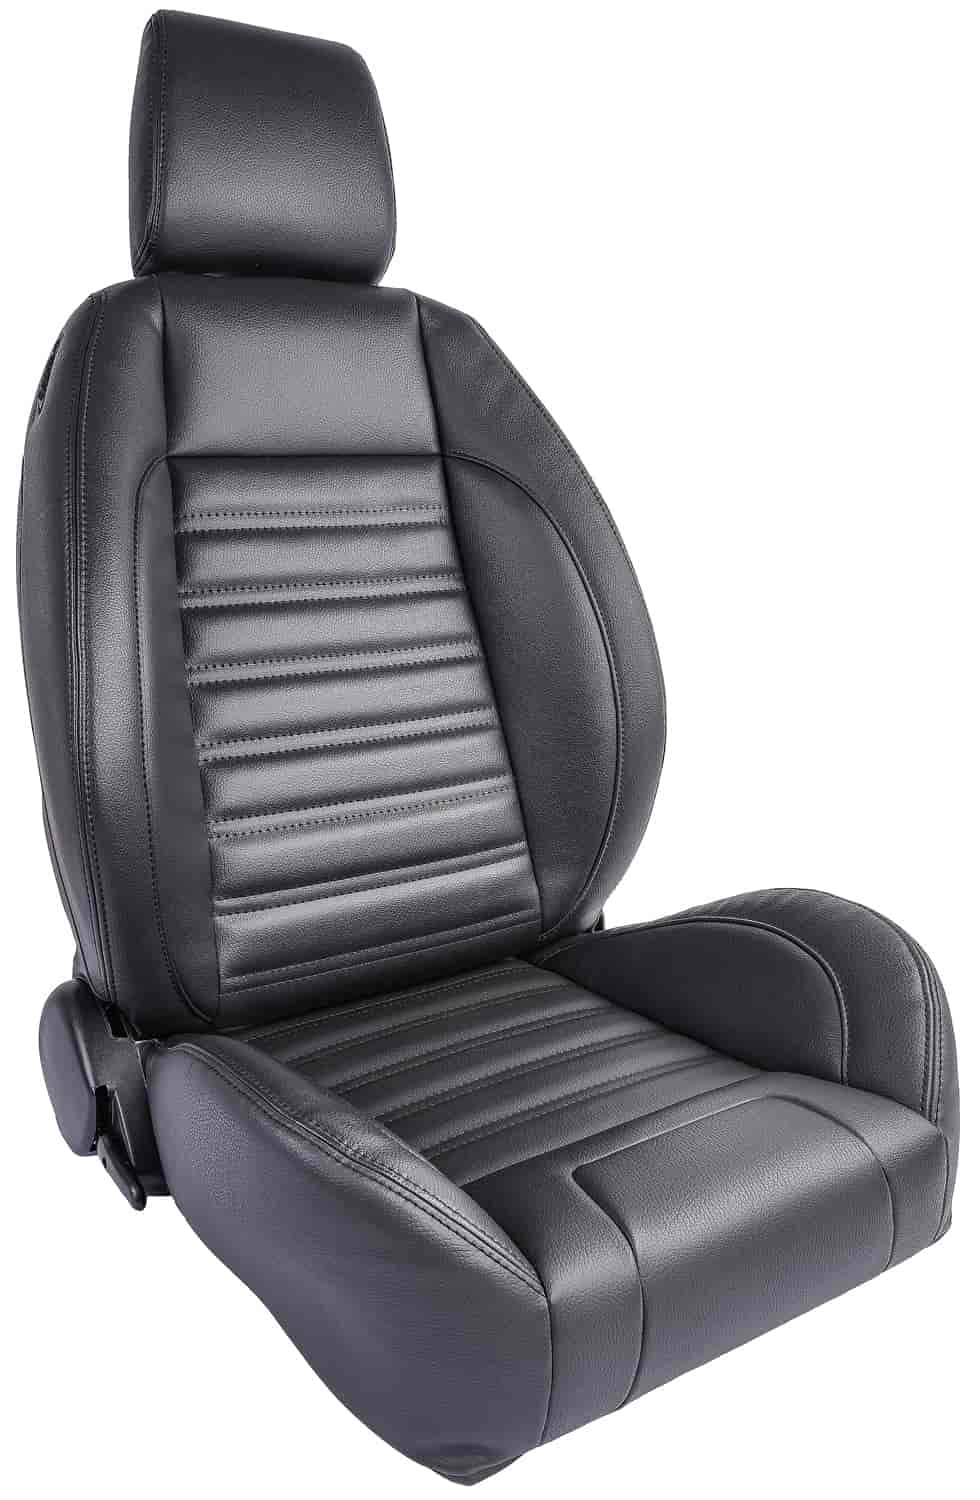 Pro Series Low Back Seat with Headrest Left